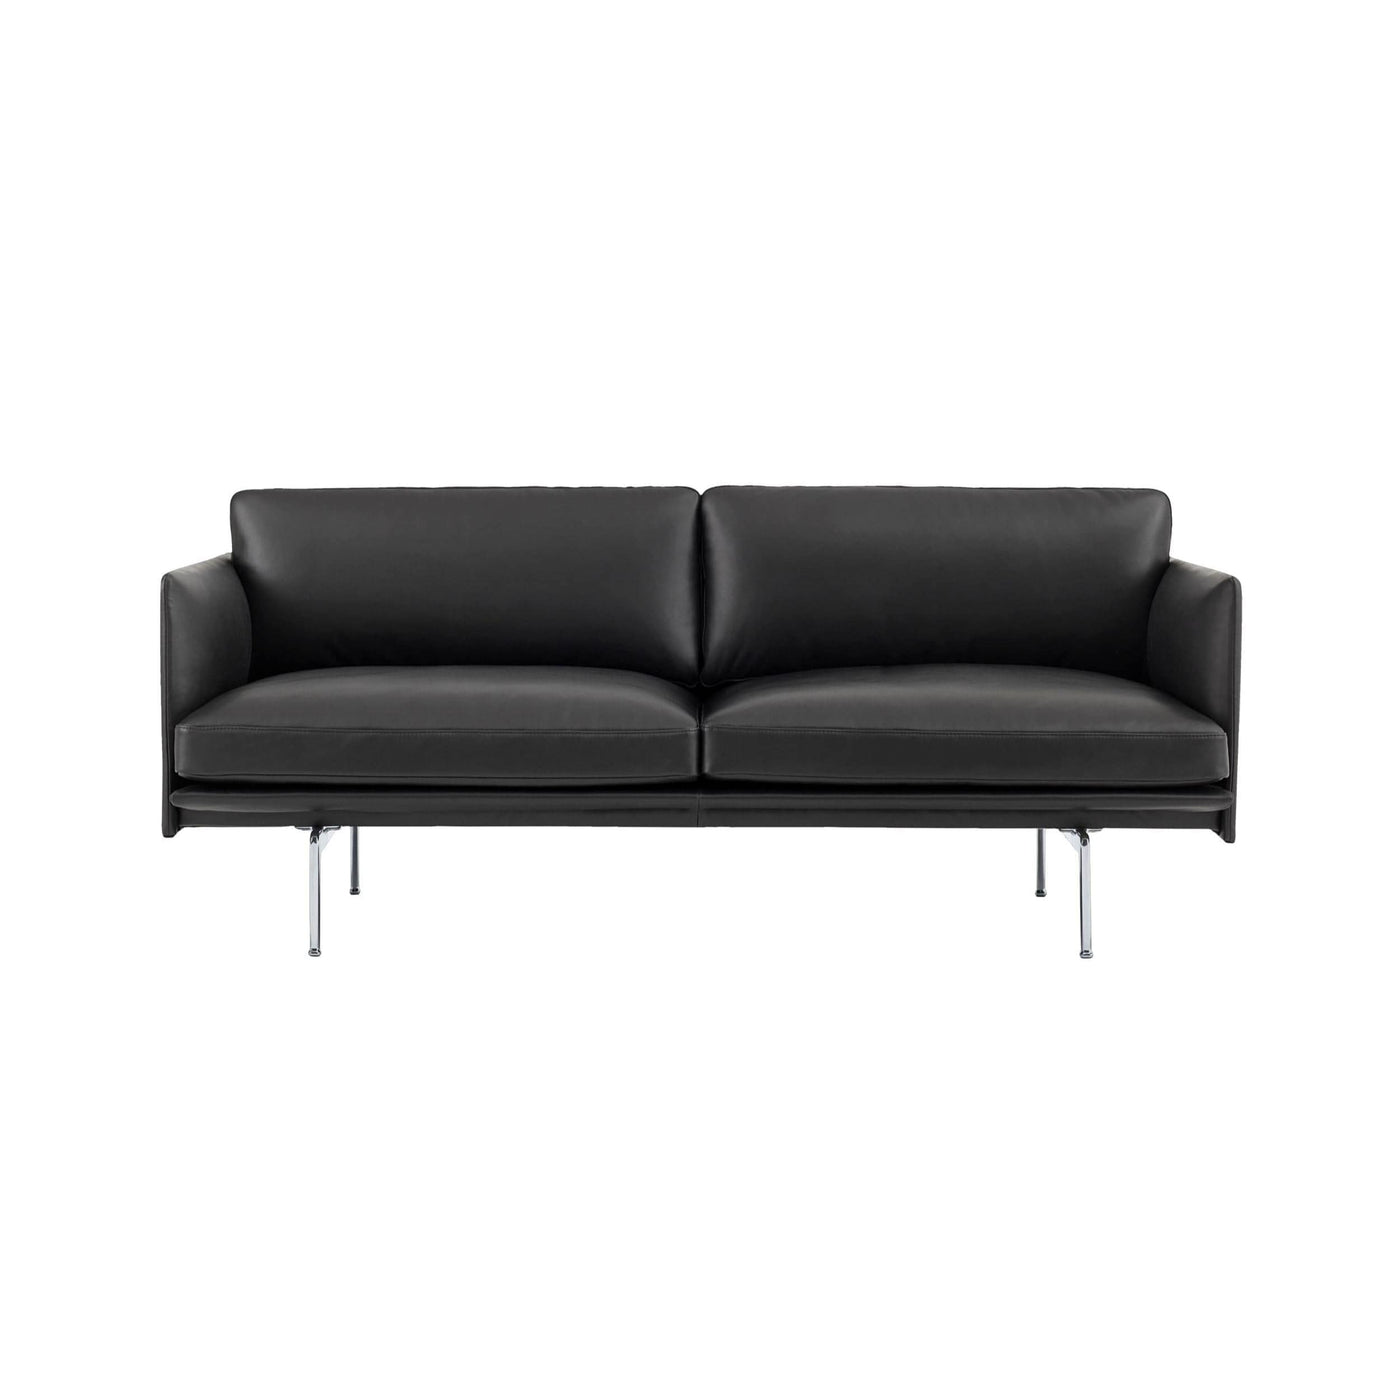 Muuto Outline 2 Seater Sofa in black refine leather and polished aluminium legs. Made to order from someday designs. #colour_black-refine-leather